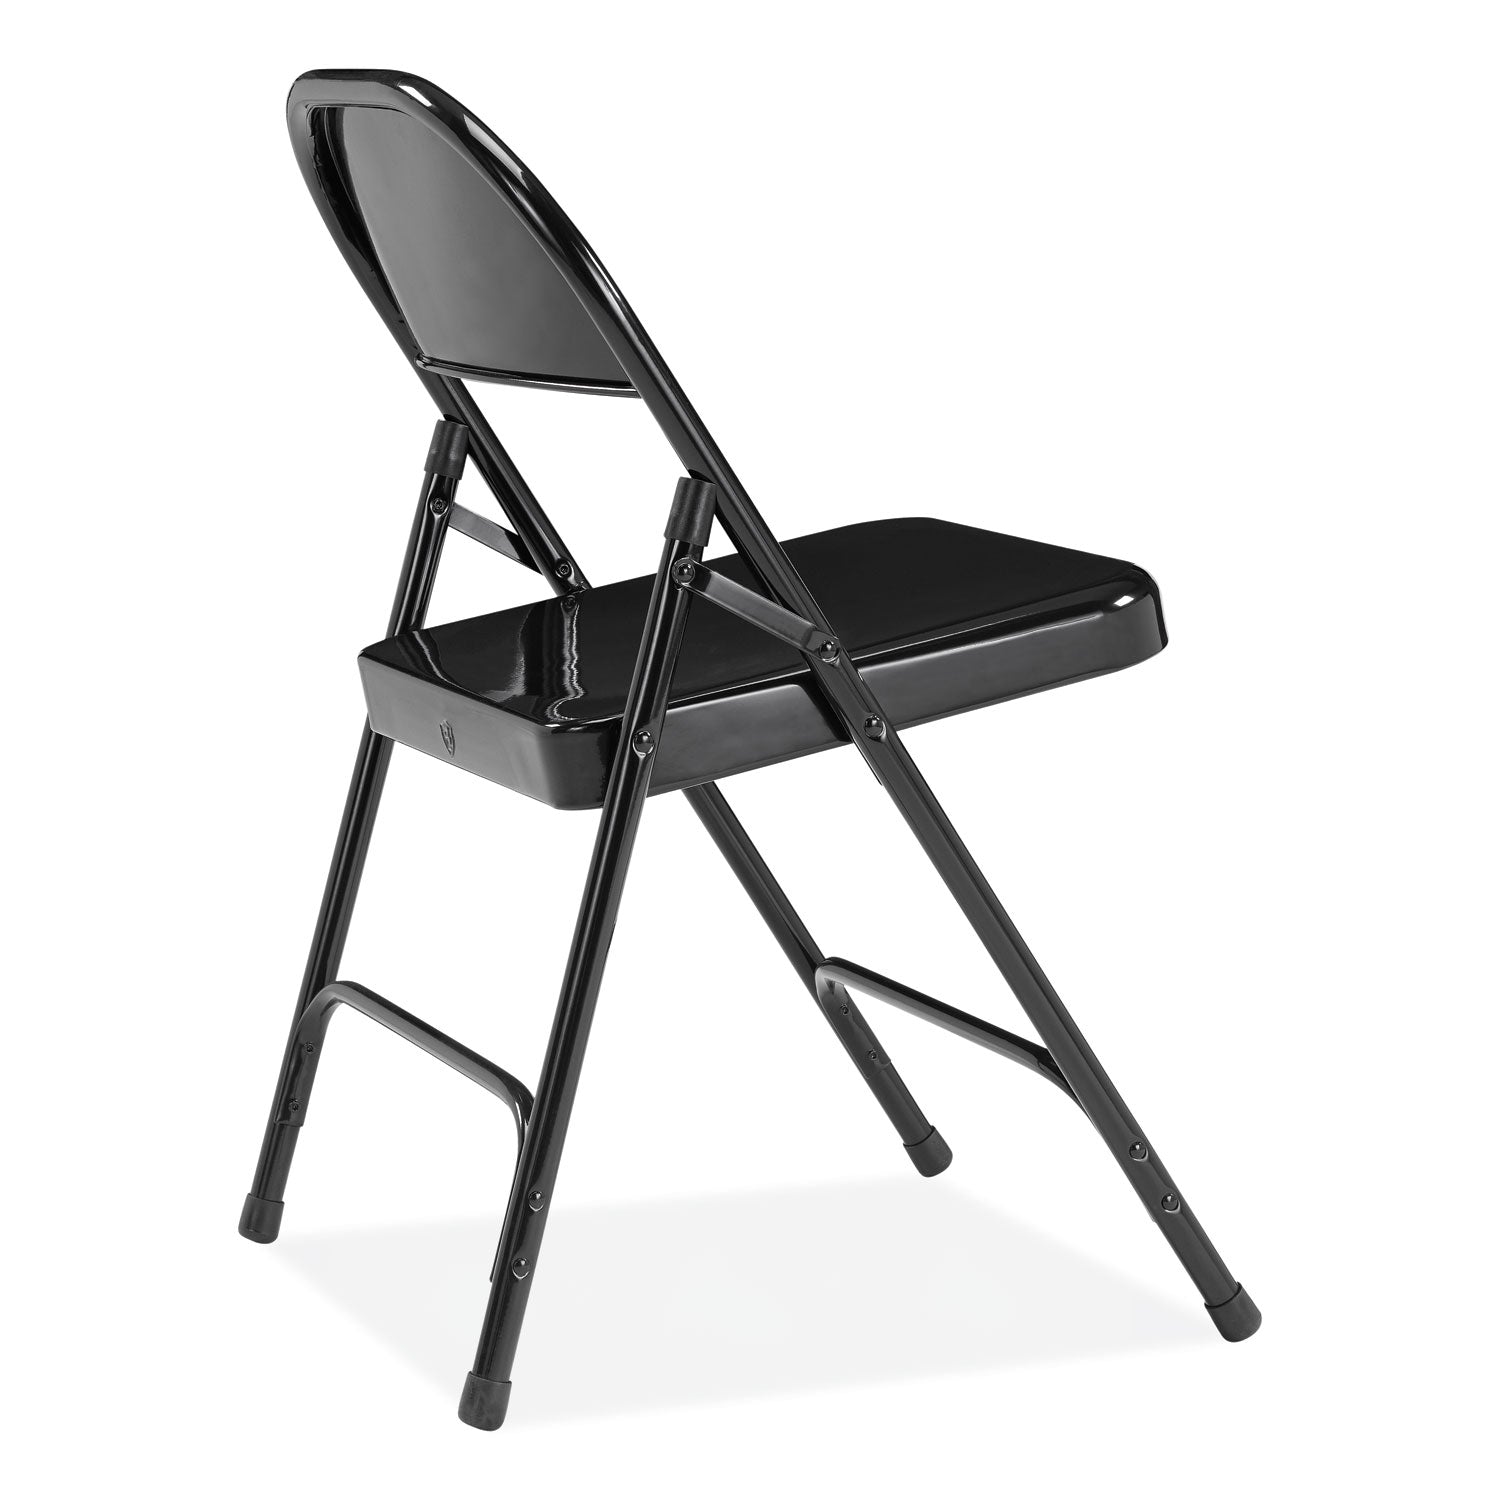 50-series-all-steel-folding-chair-supports-500-lb-1675-seat-height-black-seat-back-base-4-ctships-in-1-3-business-days_nps510 - 4